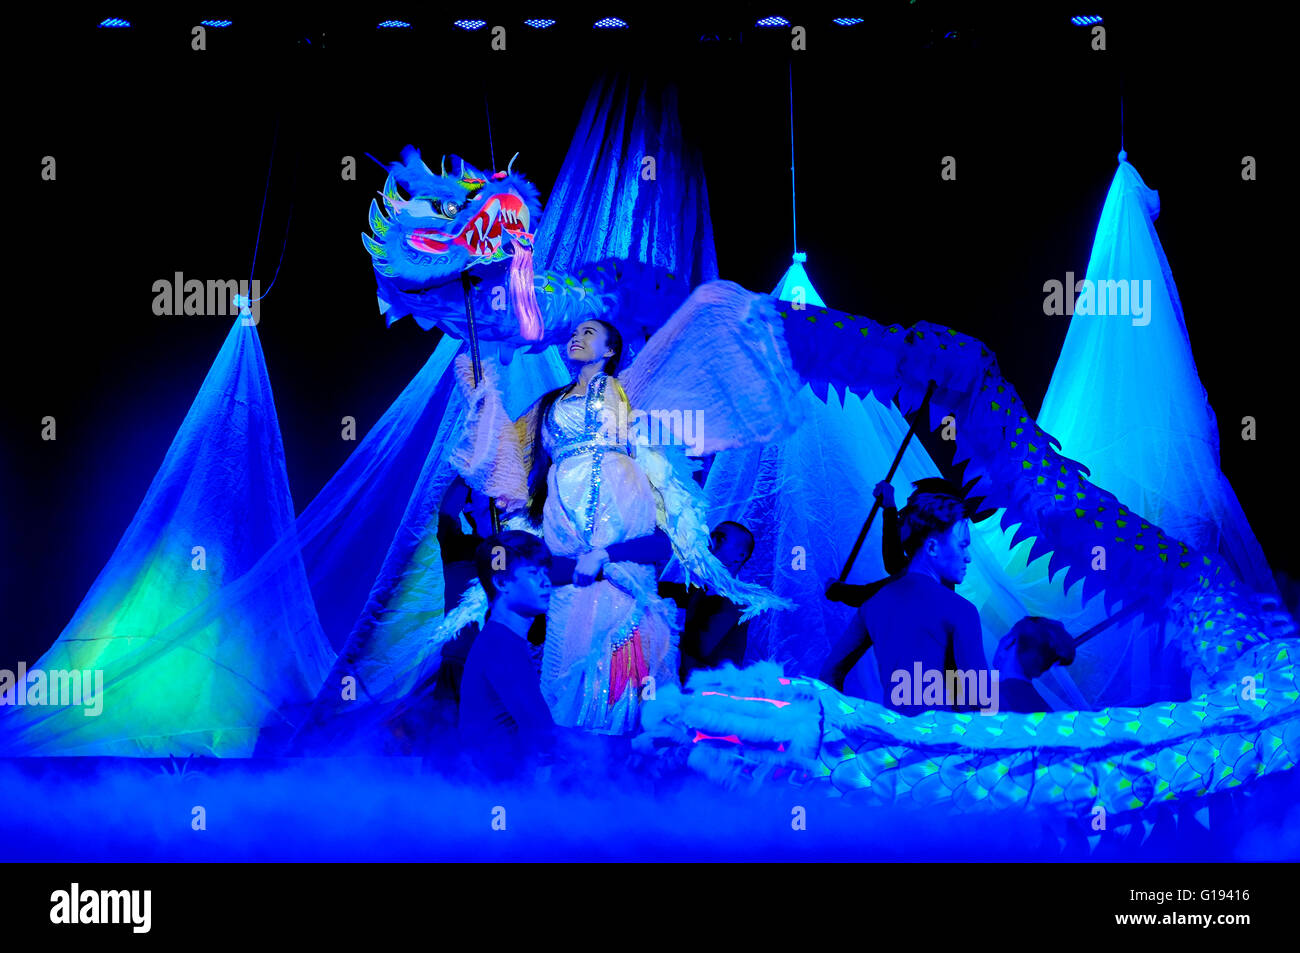 The soul of Vietnam, a cultural show in Ho Chi Minh City, Vietnam Stock Photo